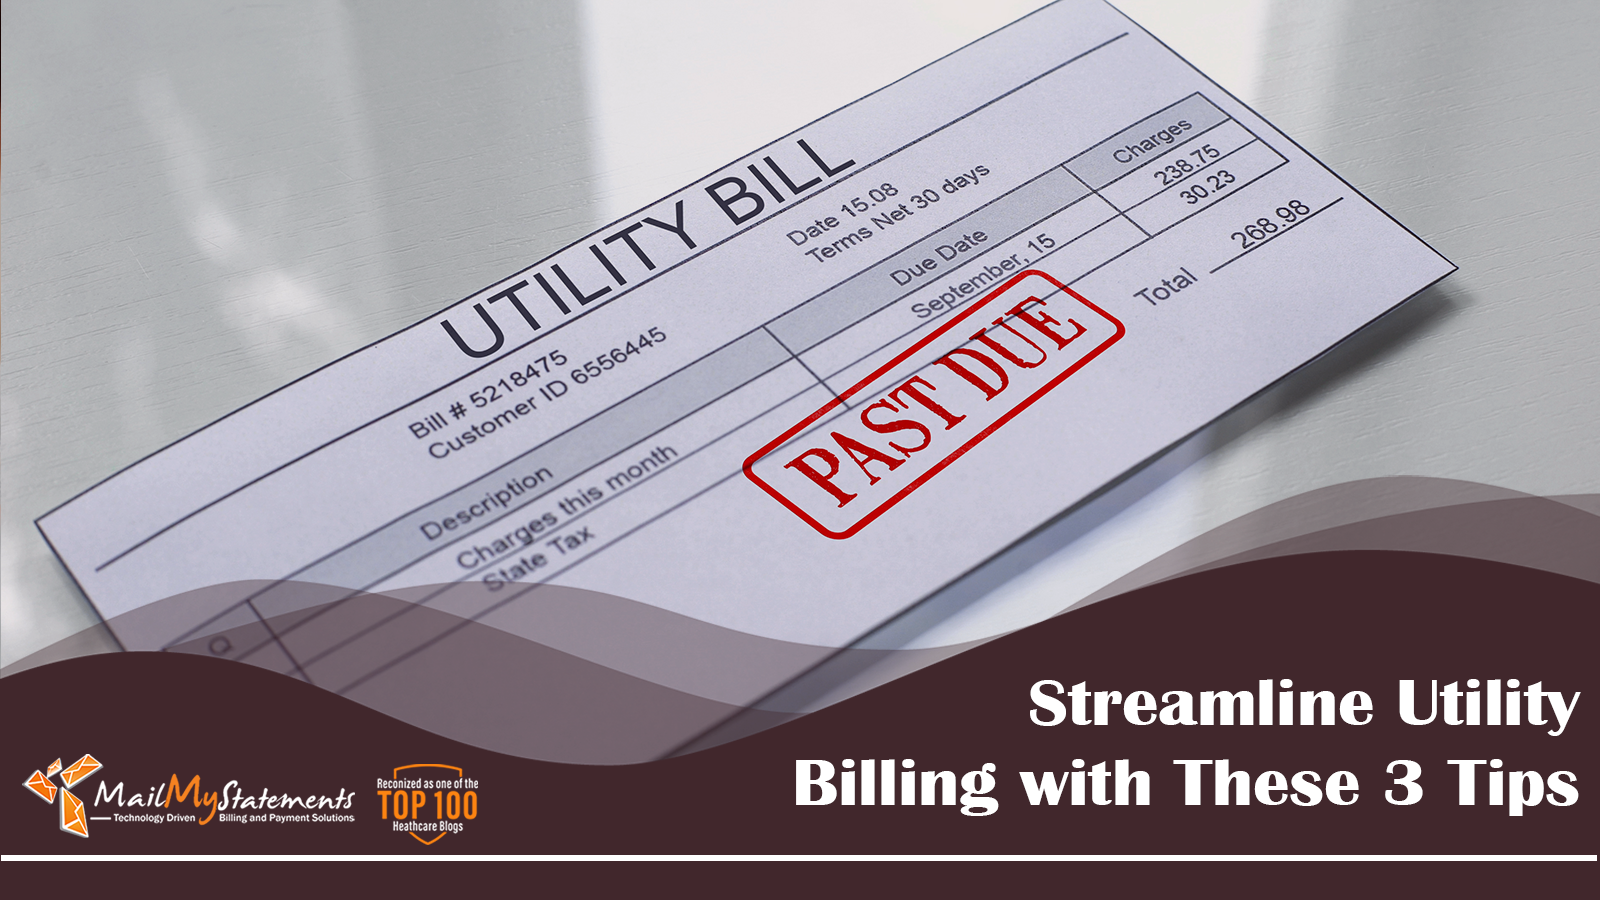 Streamline Utility Billing with These 3 Tips